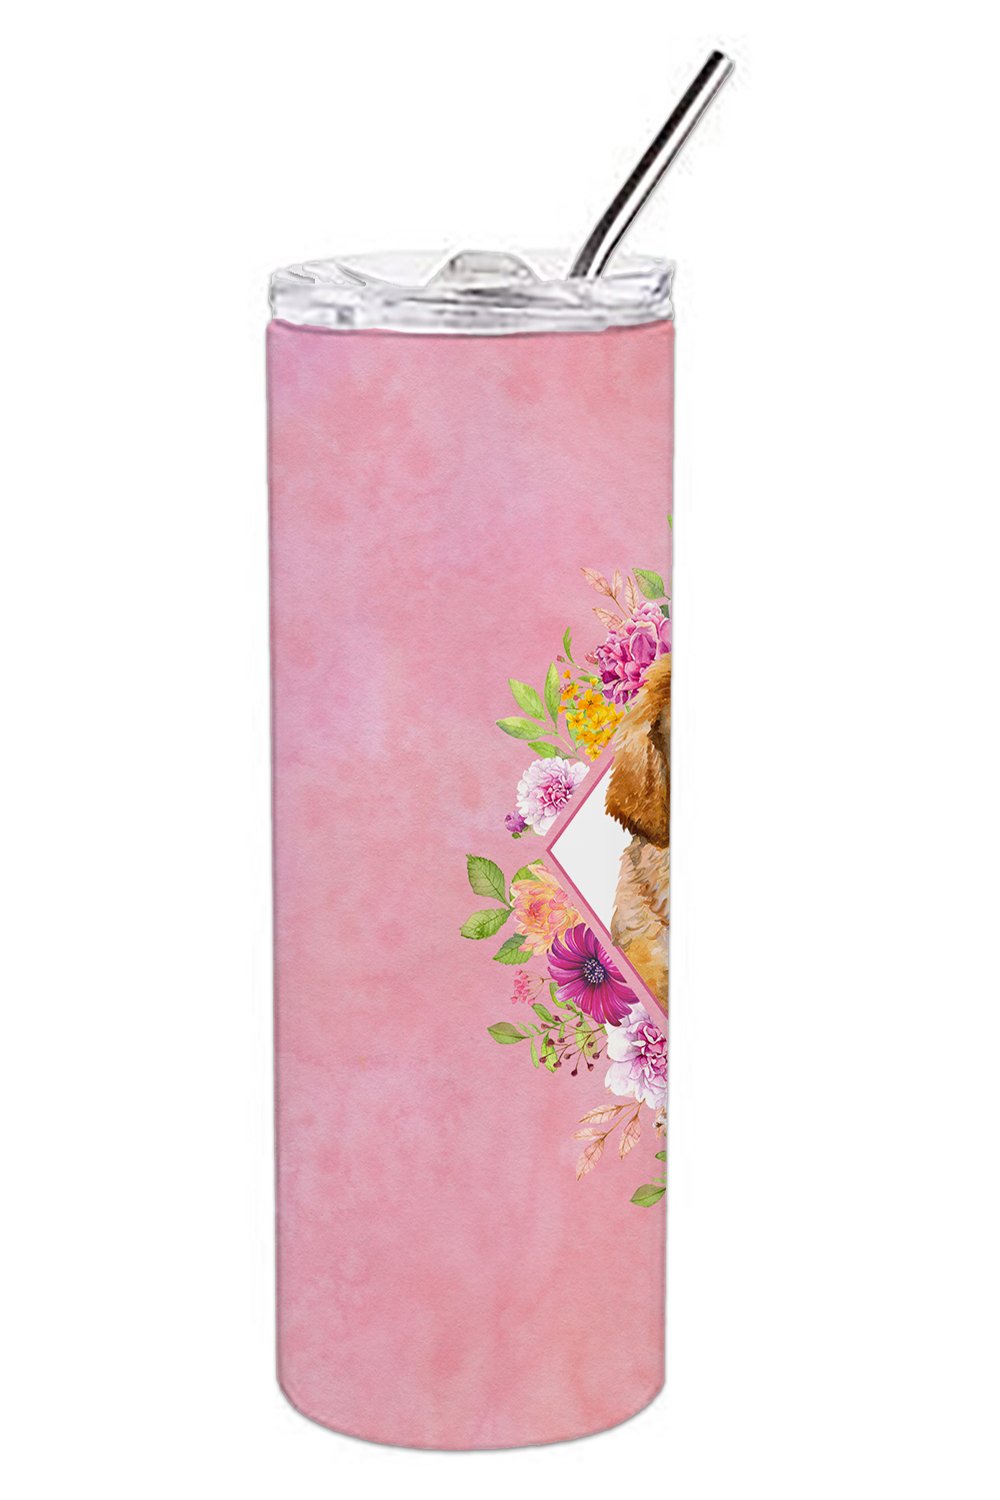 Tibetian Mastiff Puppy Pink Flowers Double Walled Stainless Steel 20 oz Skinny Tumbler CK4189TBL20 by Caroline's Treasures